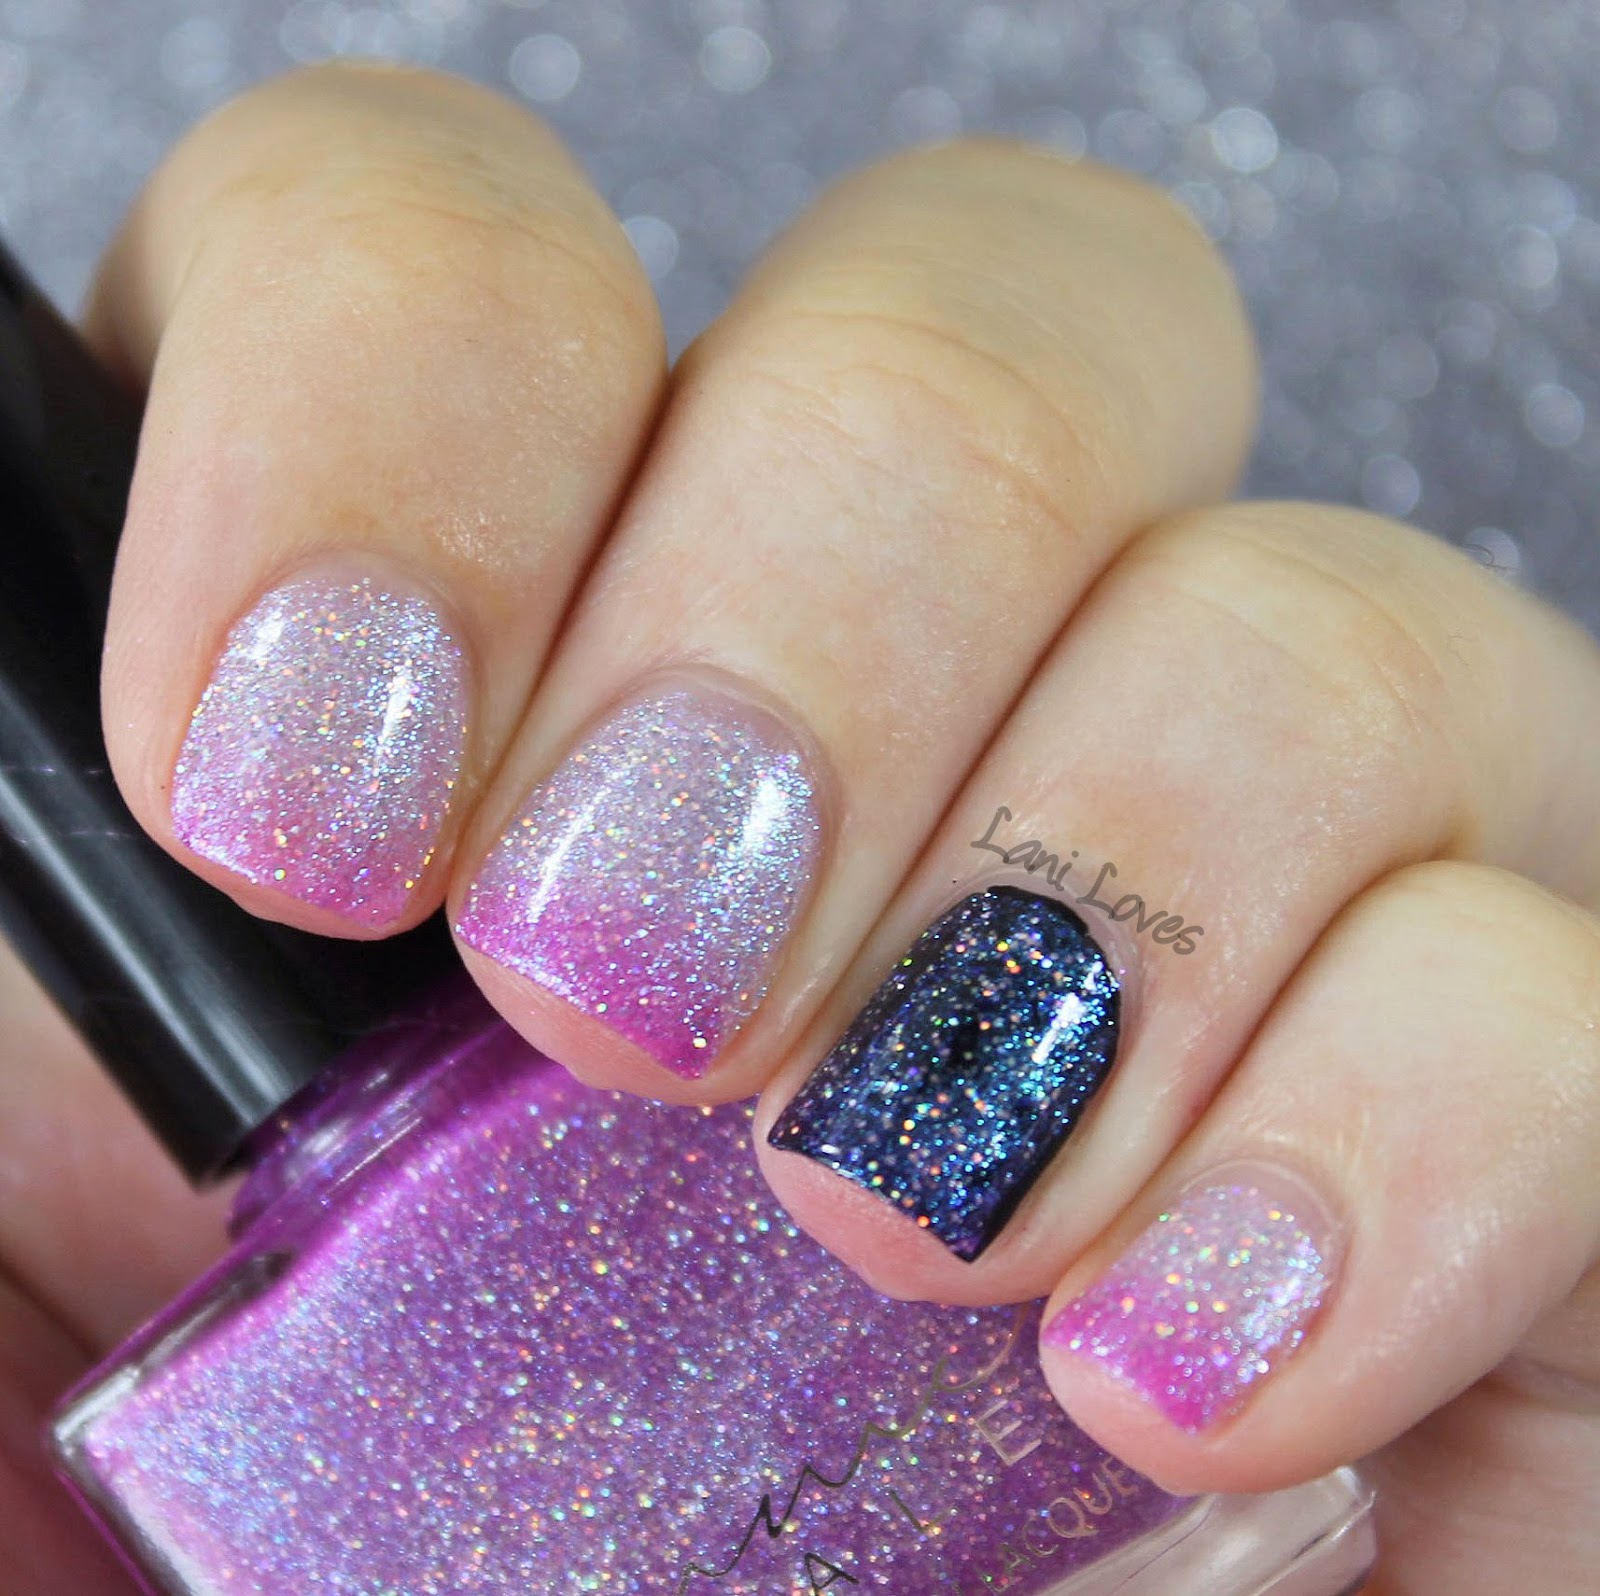 Femme Fatale Cosmetics - Who is Fairest of Them All nail polish swatches & review